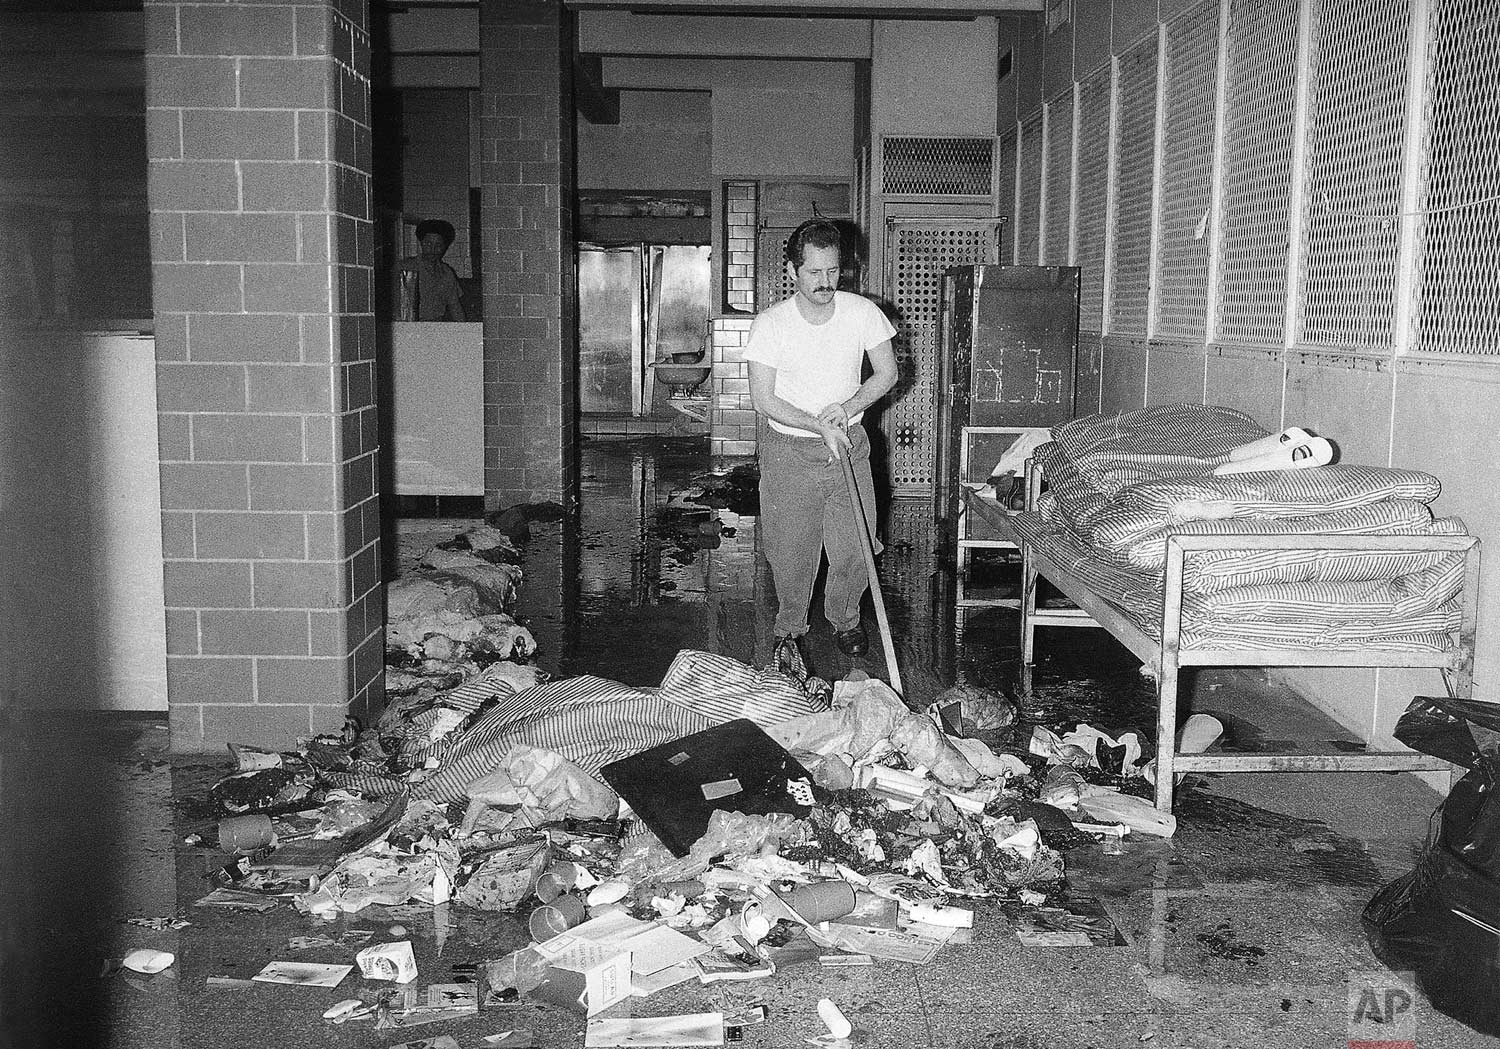  An inmate cleans up mess at the Bronx House of Detention in New York on Thursday, July 14, 1977. Corrections officials said inmates caused damage in three dormitories during the electric power failure that struck New York on Wednesday, July 13. (AP 